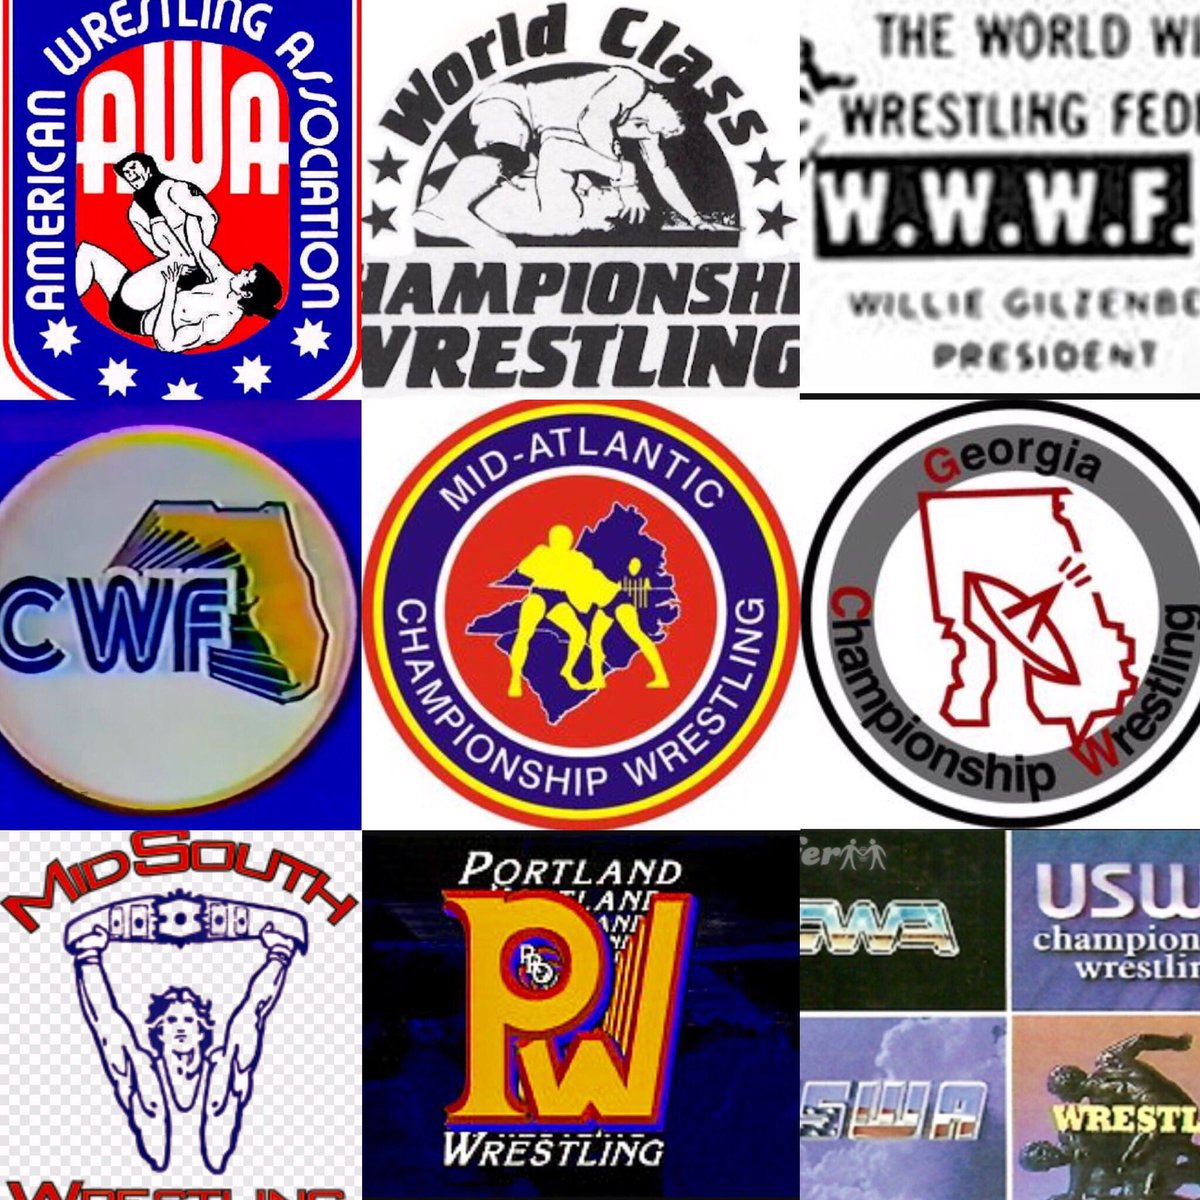 WRESTLER WEEKLY #wwTuesdayTakeaway we’re doing a TERRITORY ROLL CALL for all classic fans! If you grew up during the WCW/WWF/ECW/TNA eras which do you pledge your allegiance to? I grew up Mid-Atlantic ‘70’s & moved to Florida wrestling in 1981 then back to NWA/Raleigh in ‘87 #SR